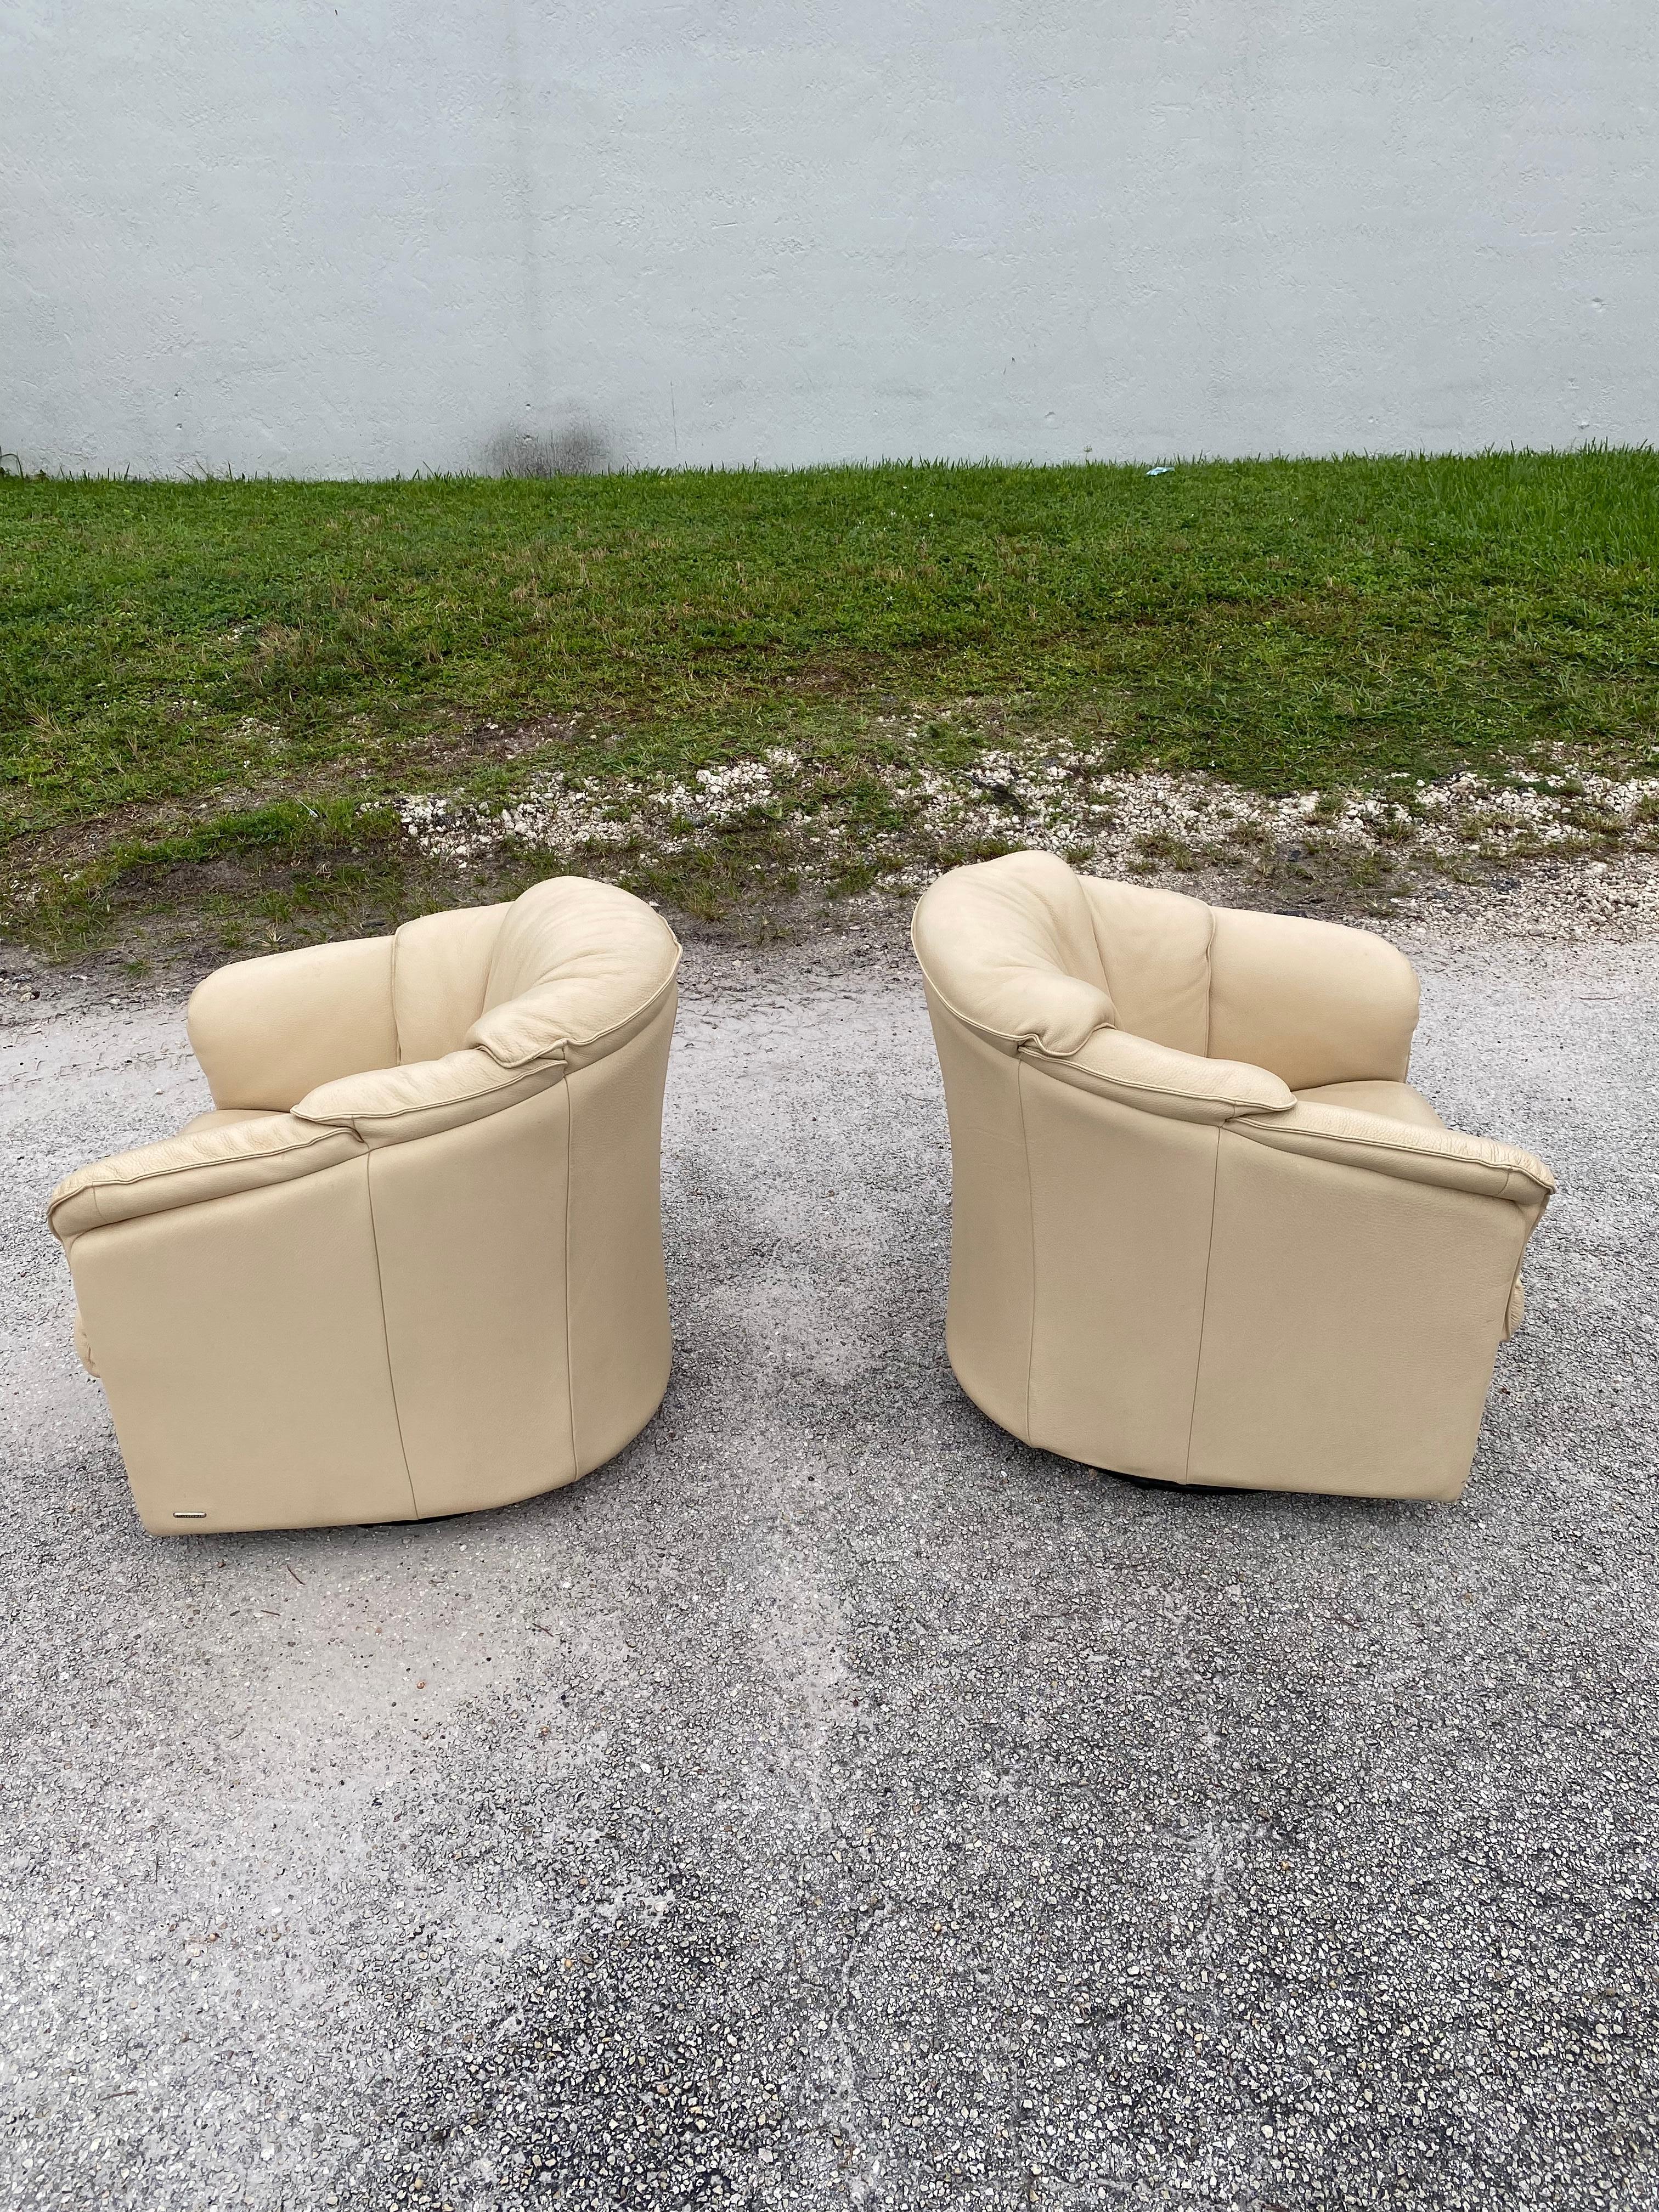 1980s Natuzzi Beige Leather Barrel Swivel Chairs, Set of 2 In Good Condition For Sale In Fort Lauderdale, FL